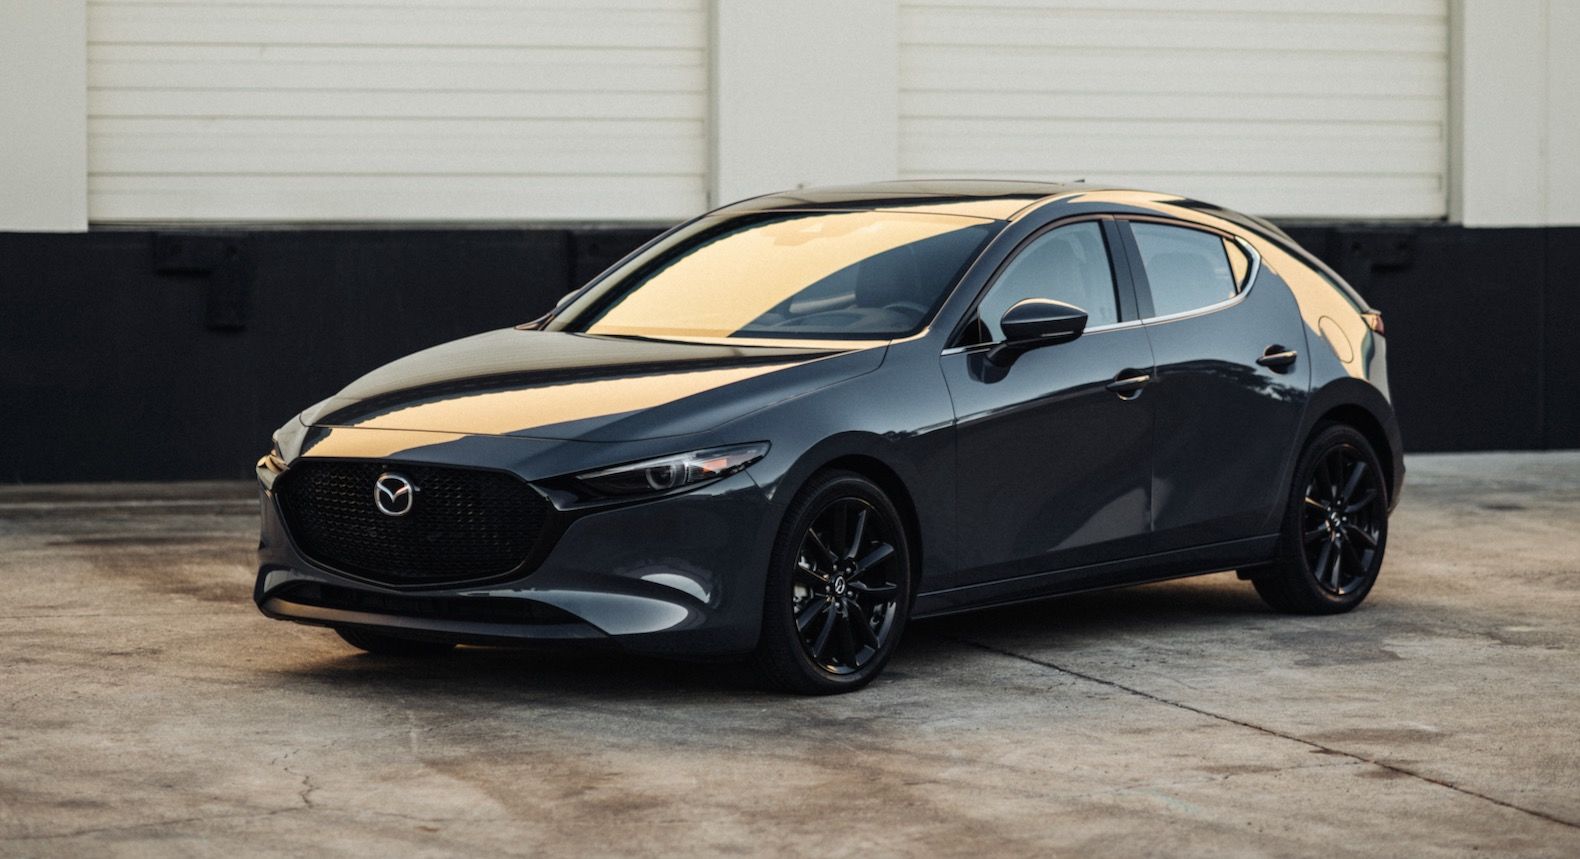 2021 Mazda3 vs. 2021 Honda Civic: better performance and more features